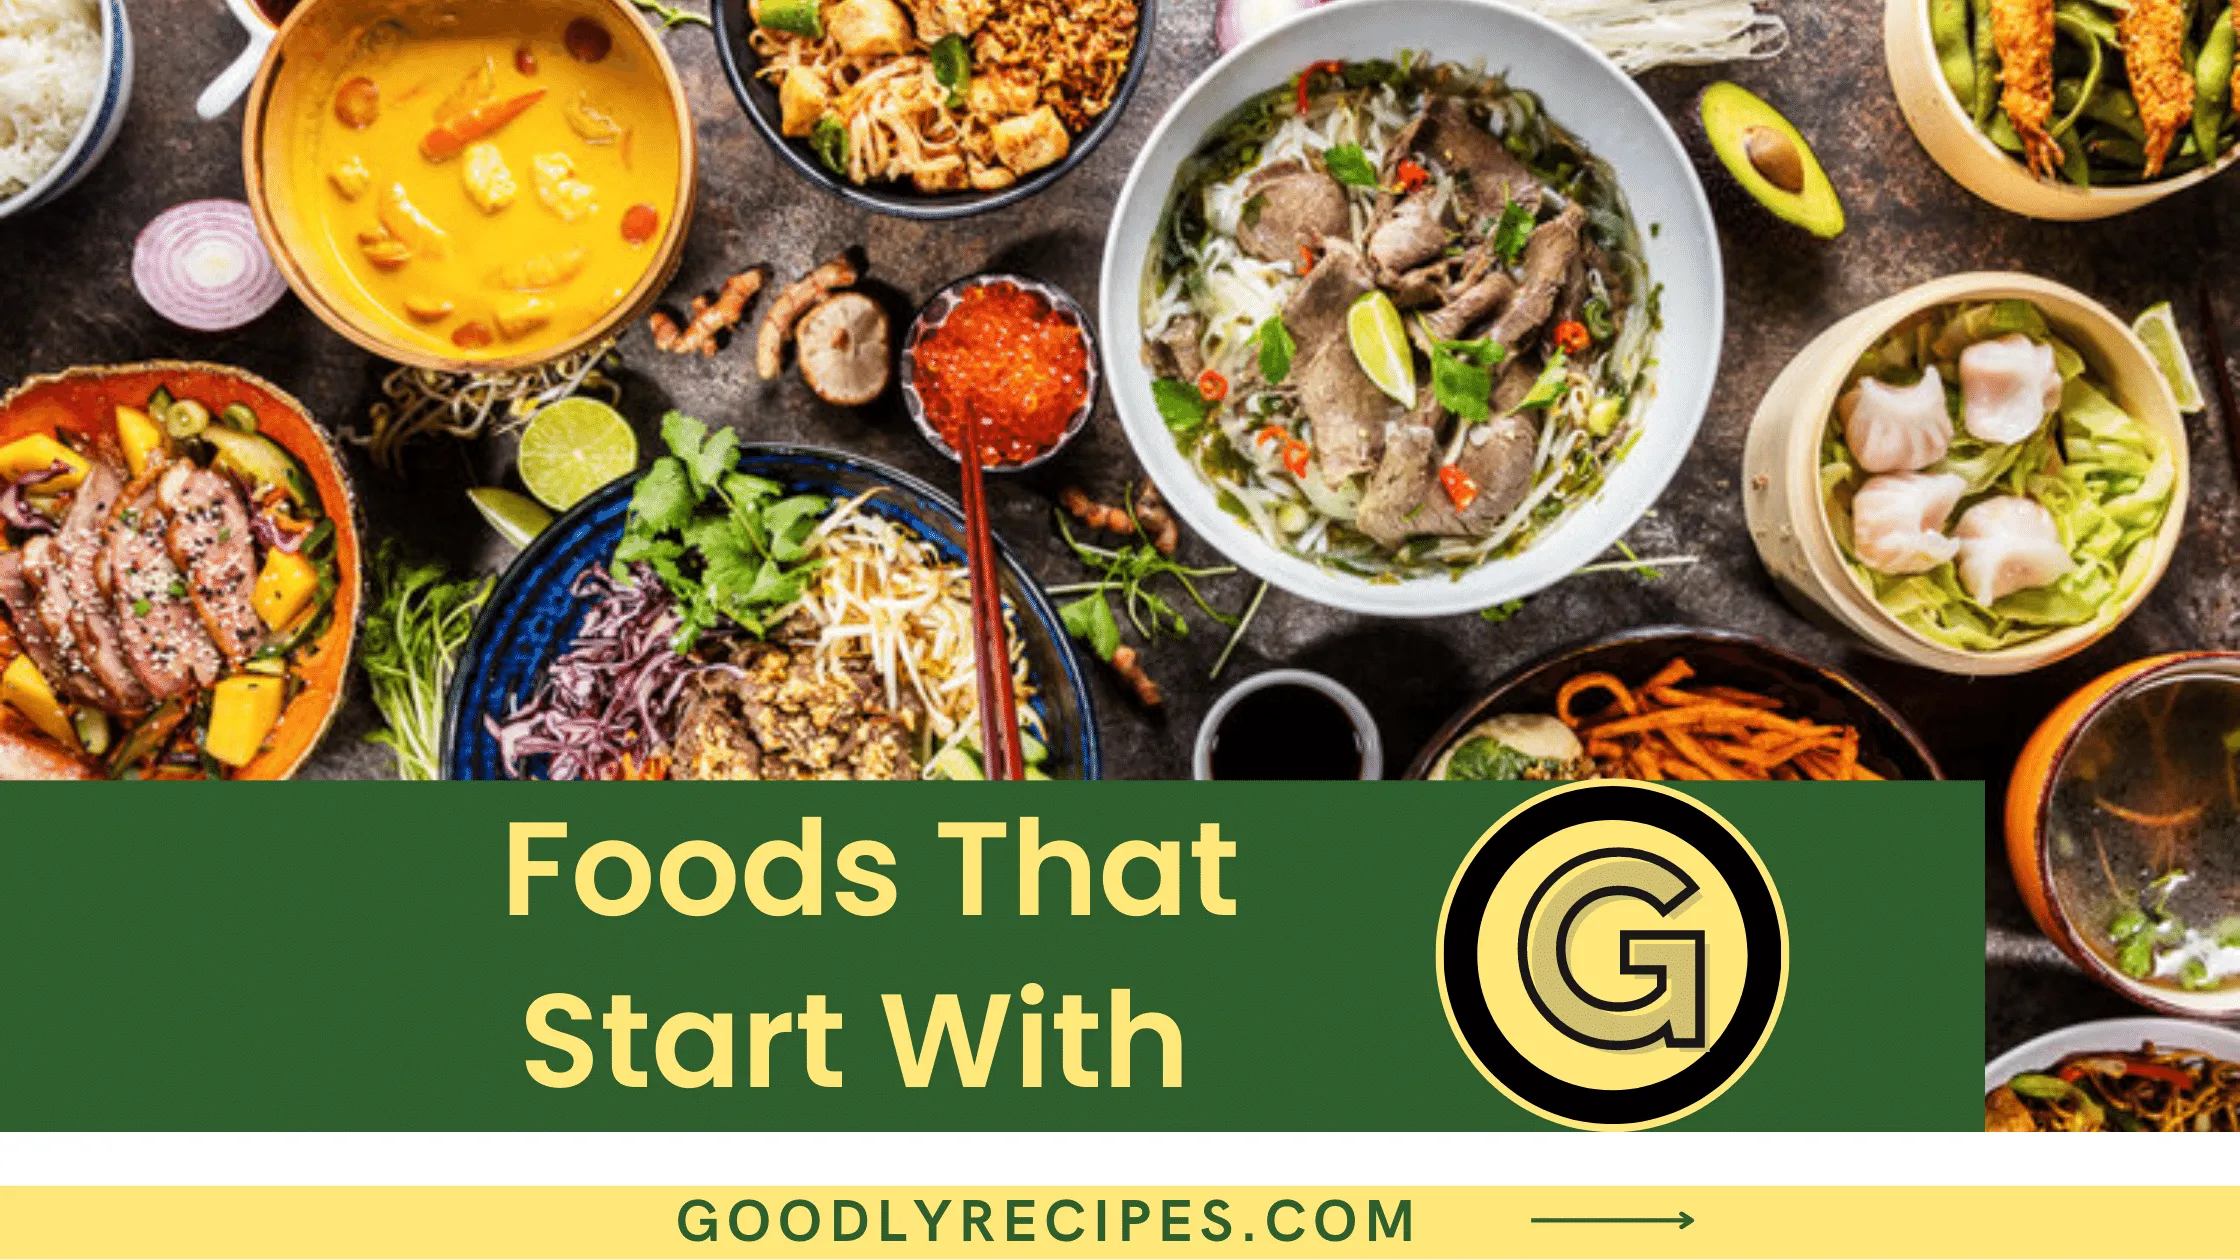 Foods That Start With G - Special Dishes